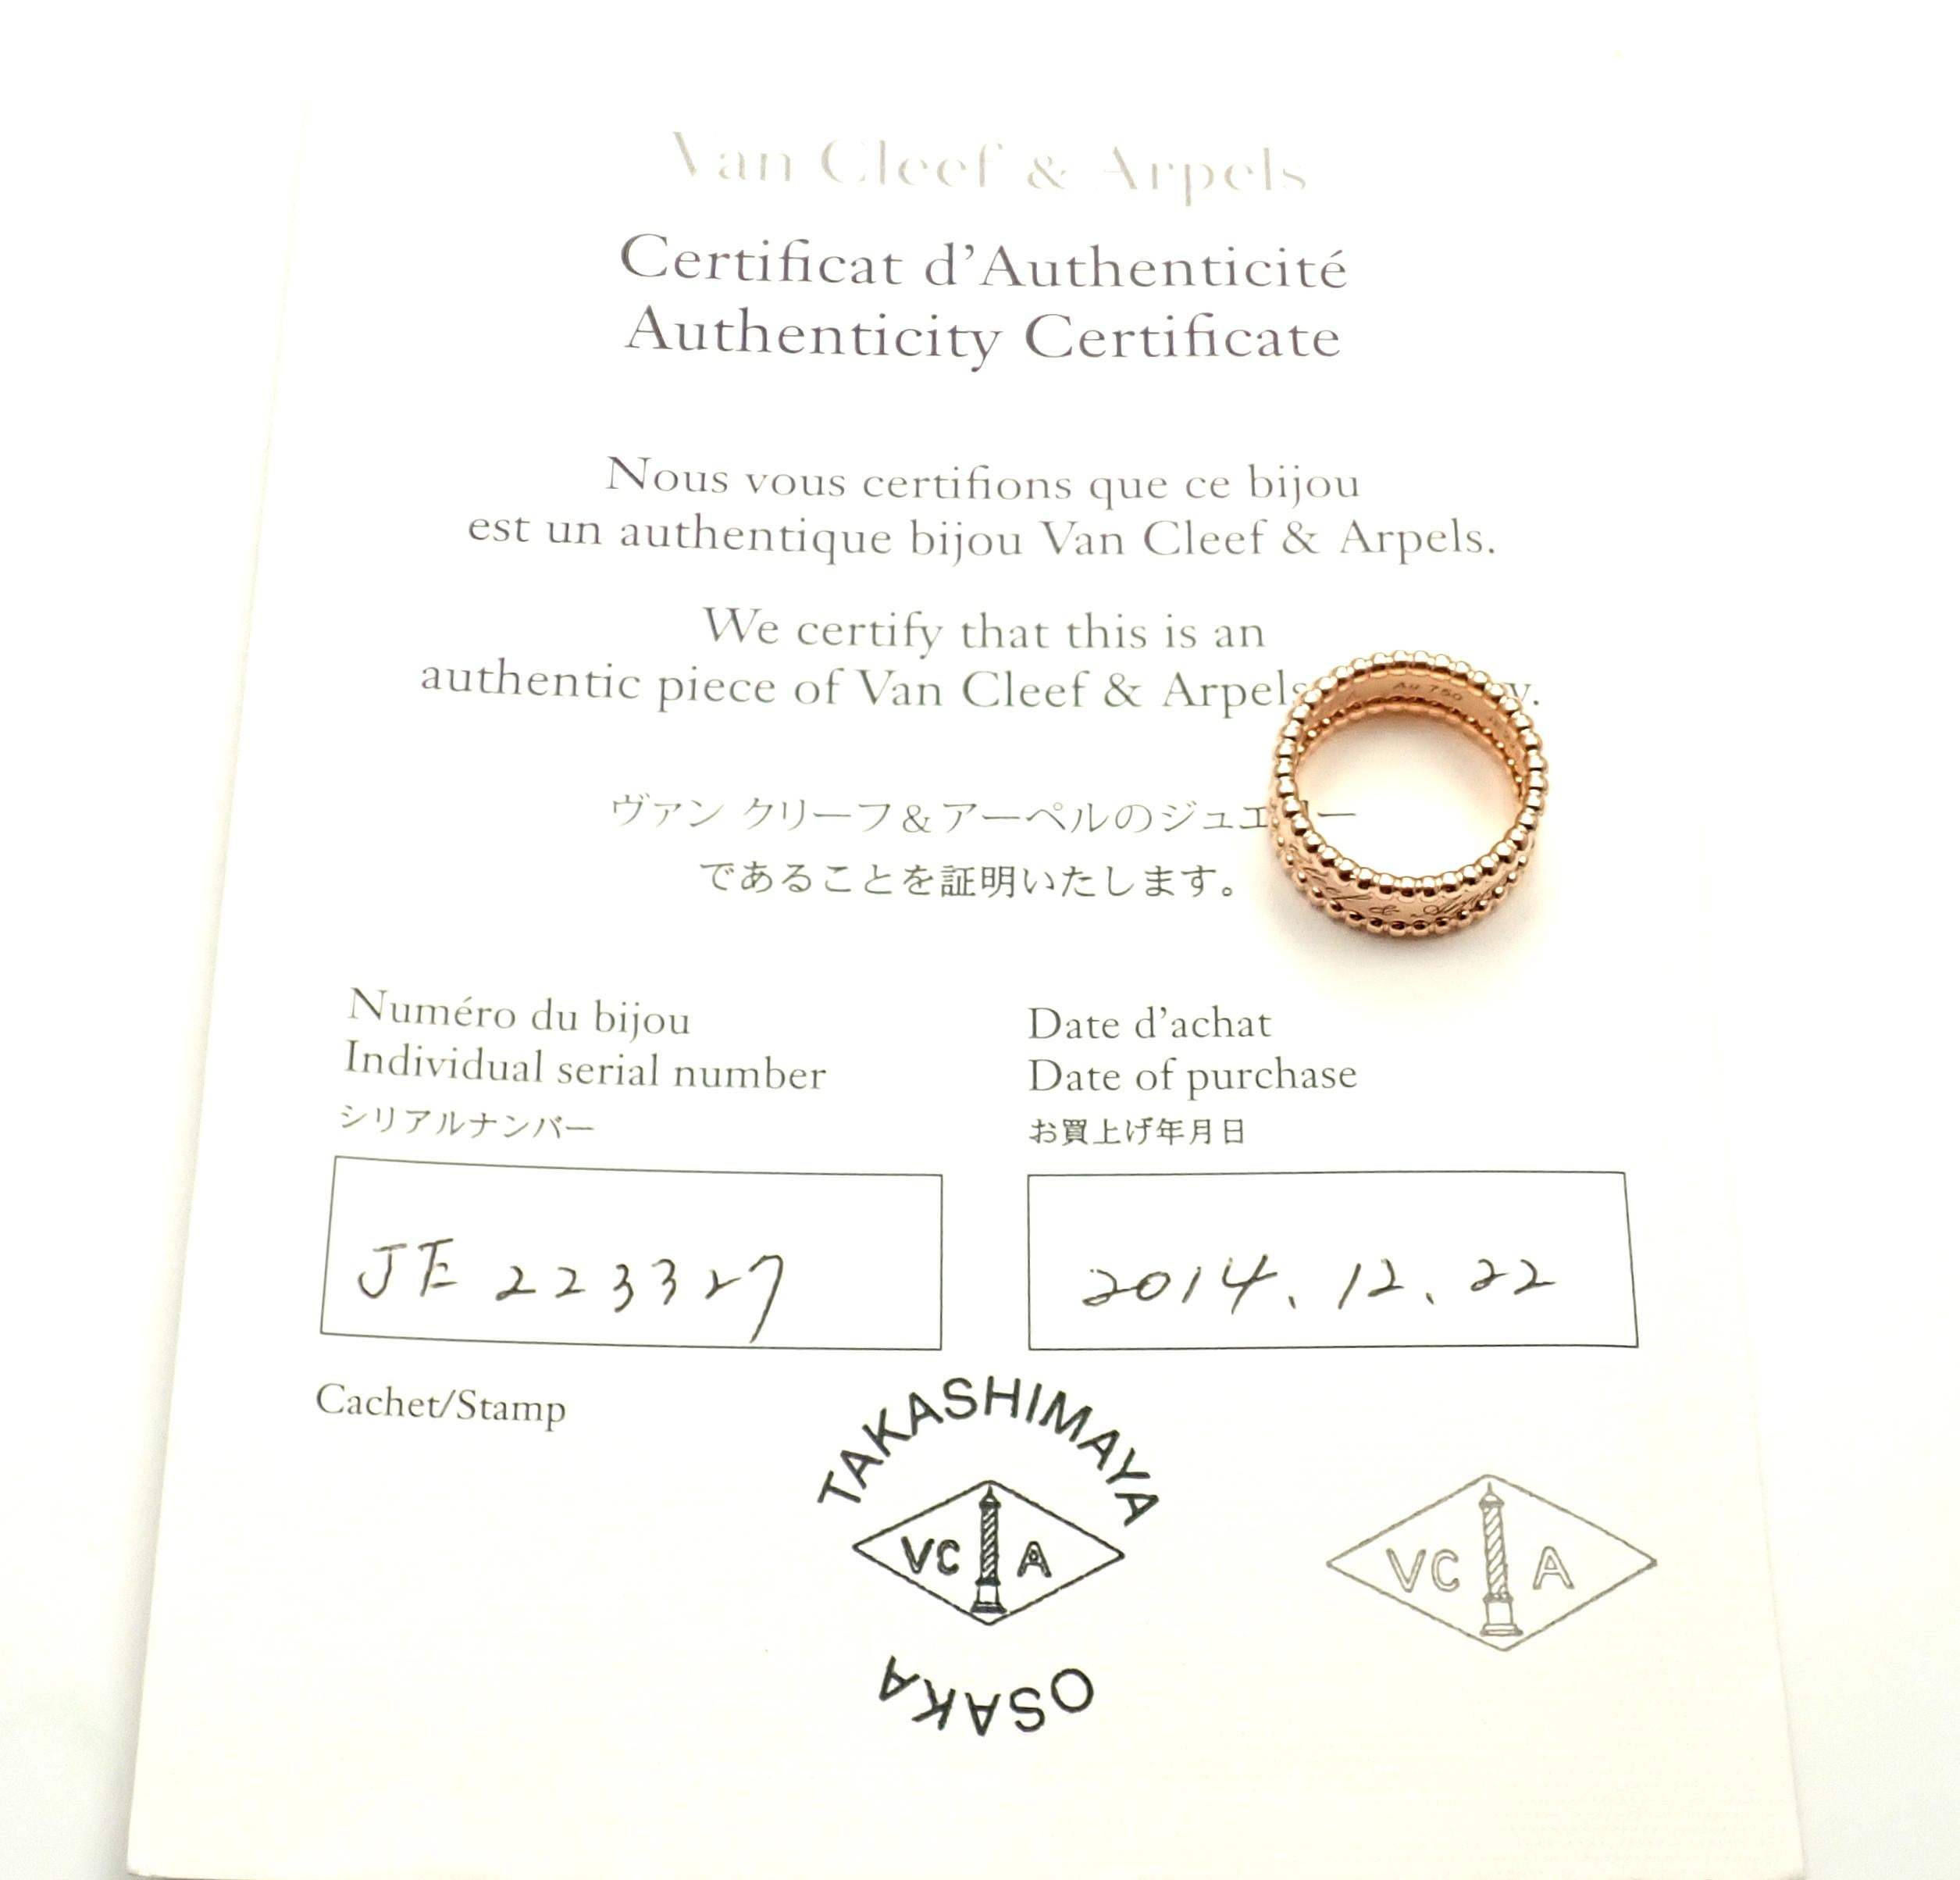 18k Rose Gold Perlee band ring by Van Cleef & Arpels. 
This ring comes with Van Cleef & Arpels certificate and a box.
Details: 
Ring Size: European 51, US 5 3/4
Weight: 7.9 grams
Width: 8mm
Stamped Hallmarks: Van Cleef & Arpels 750 51 JE223327
*Free